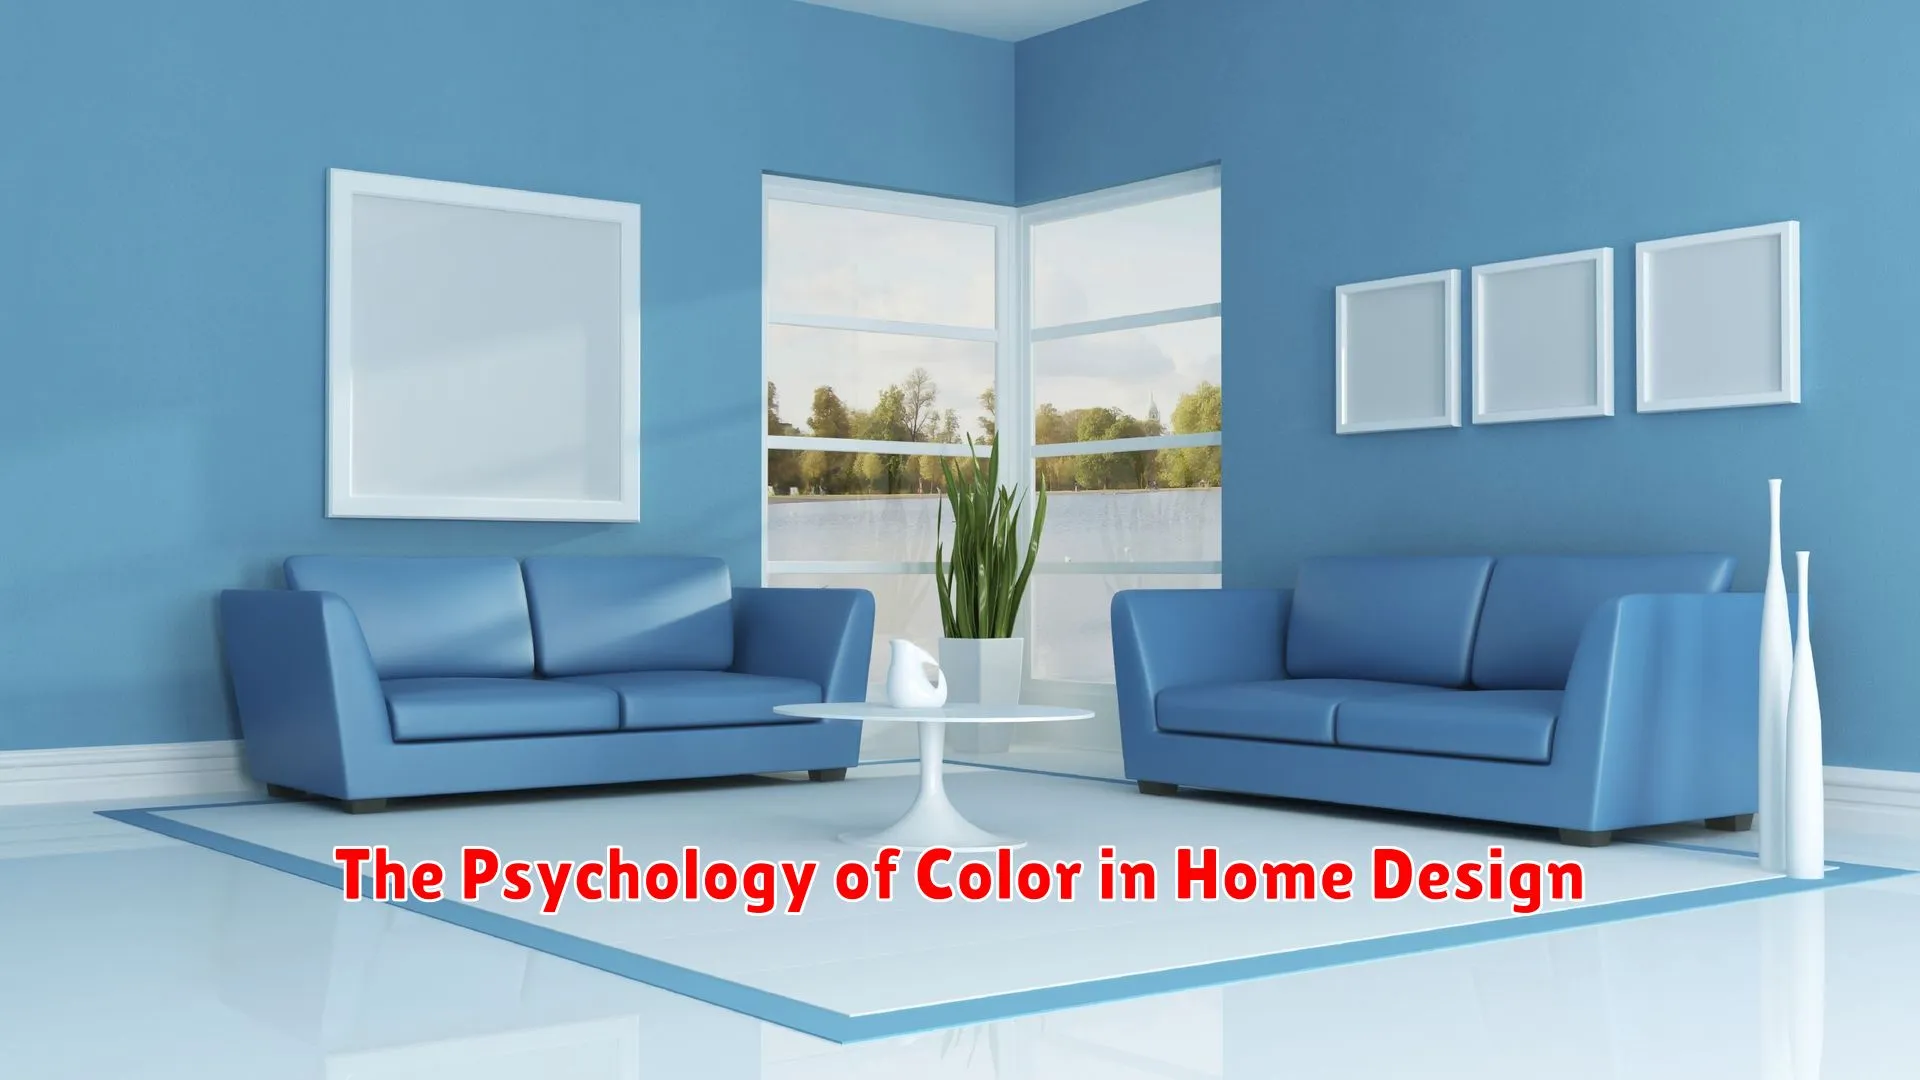 The Psychology of Color in Home Design